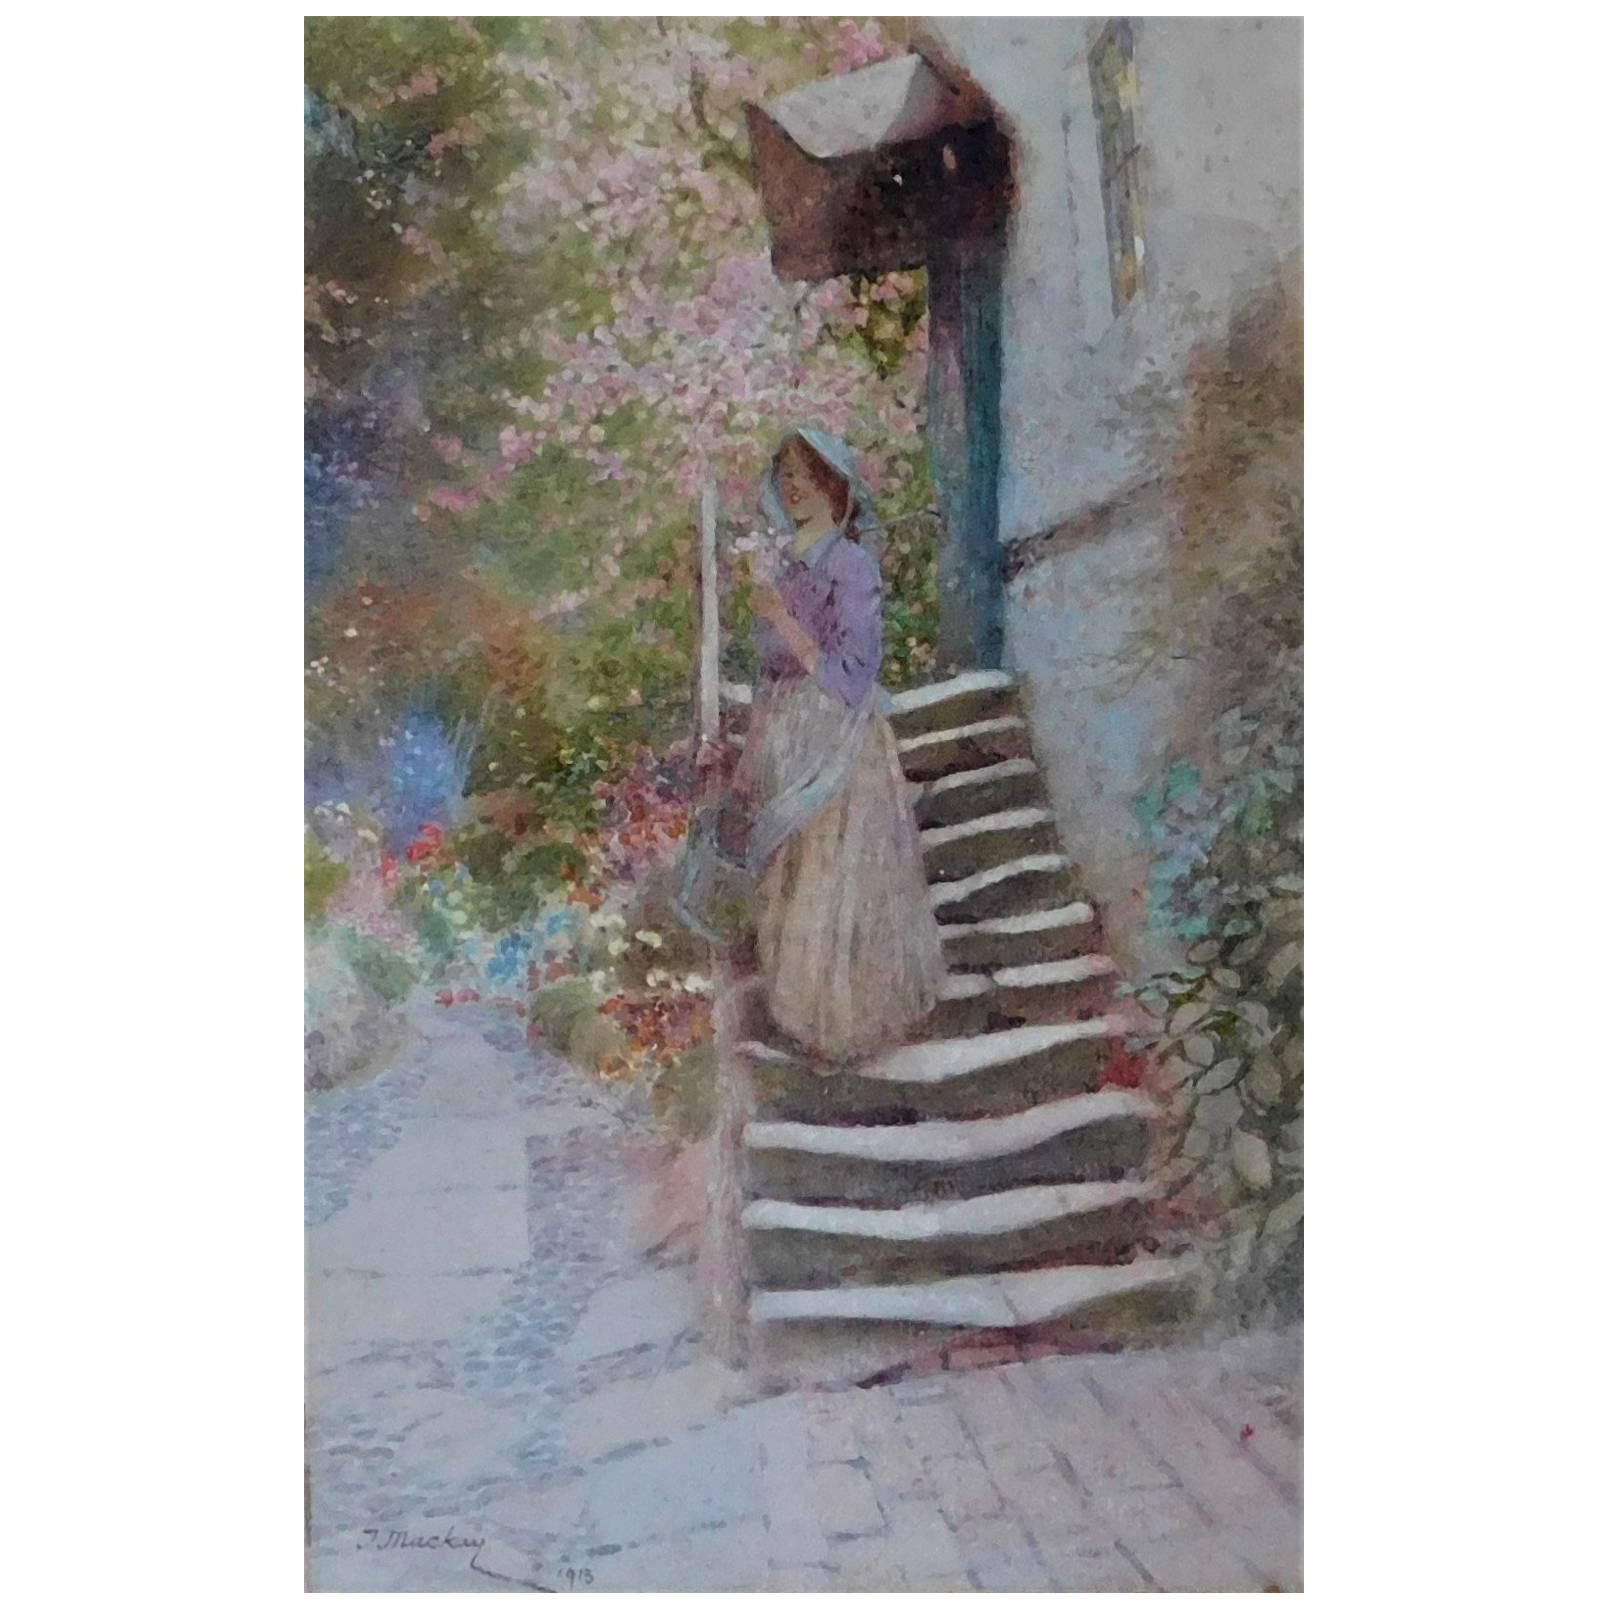 Thomas Mackay 1913 Watercolor Painting "Woman on Stairs" For Sale